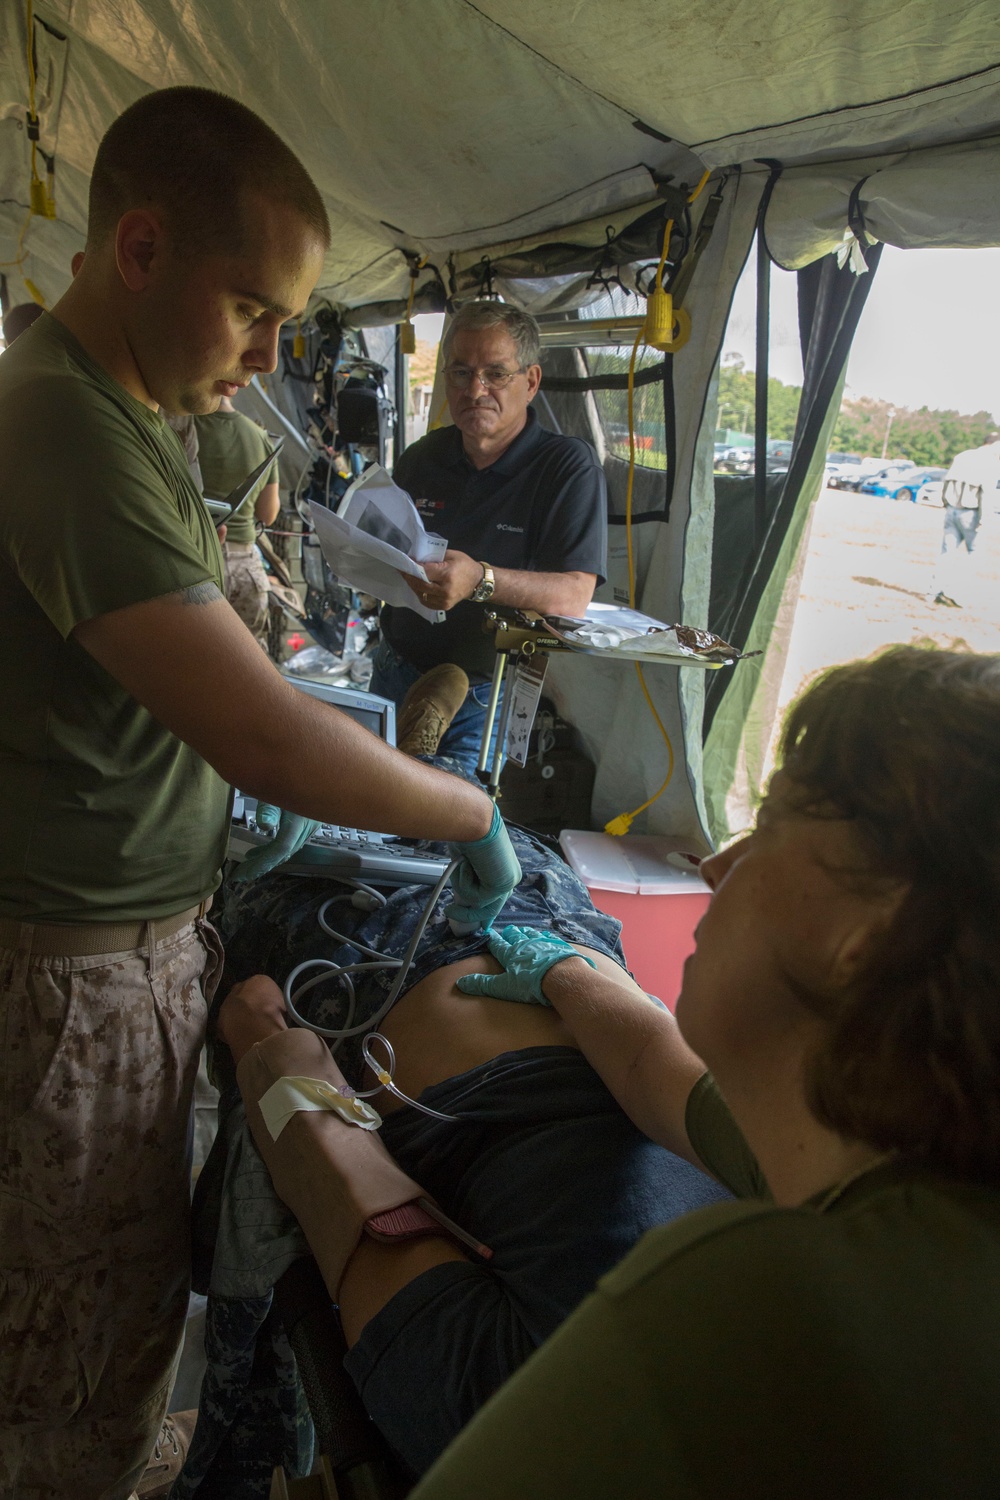 Cohesion under pressure: Lifesavers hone craft during realistic casualty training